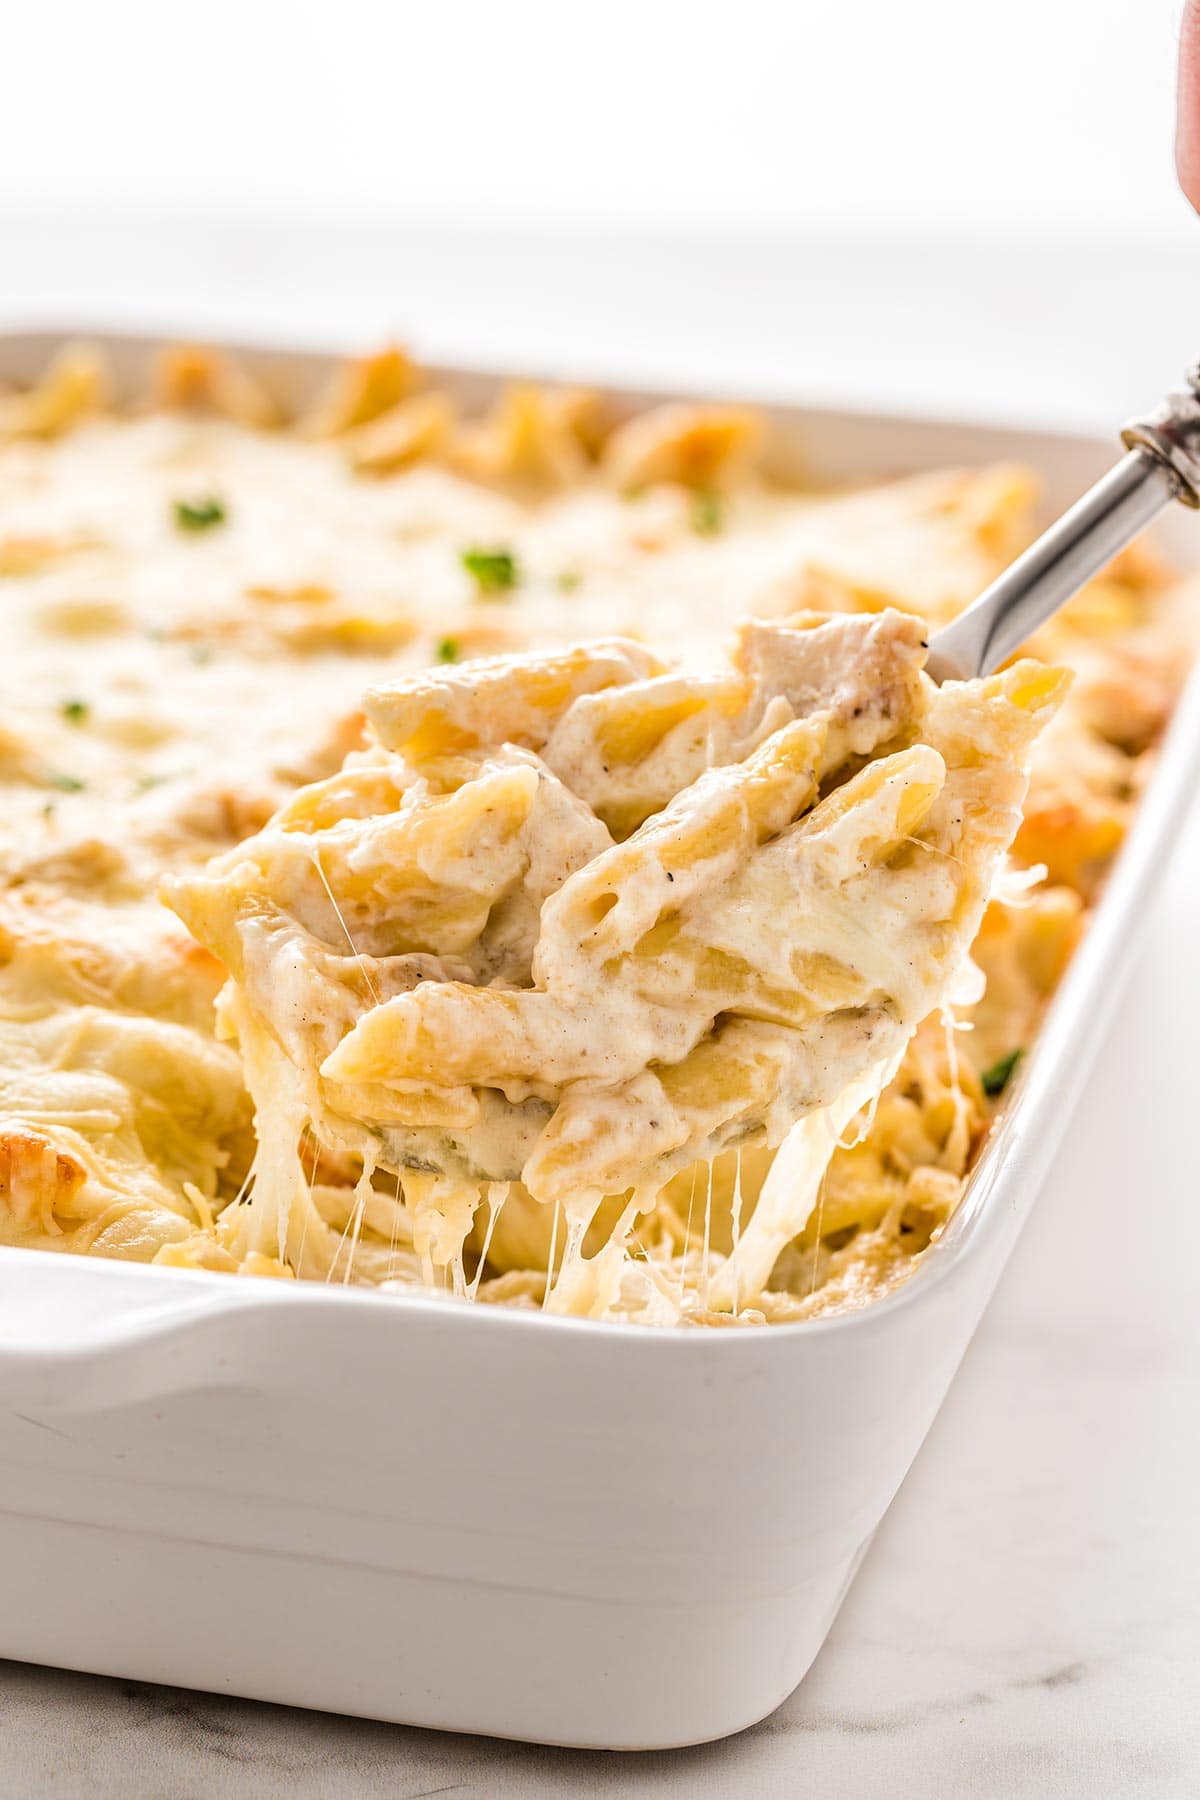 59 Freezer Meals the Whole Family will Love